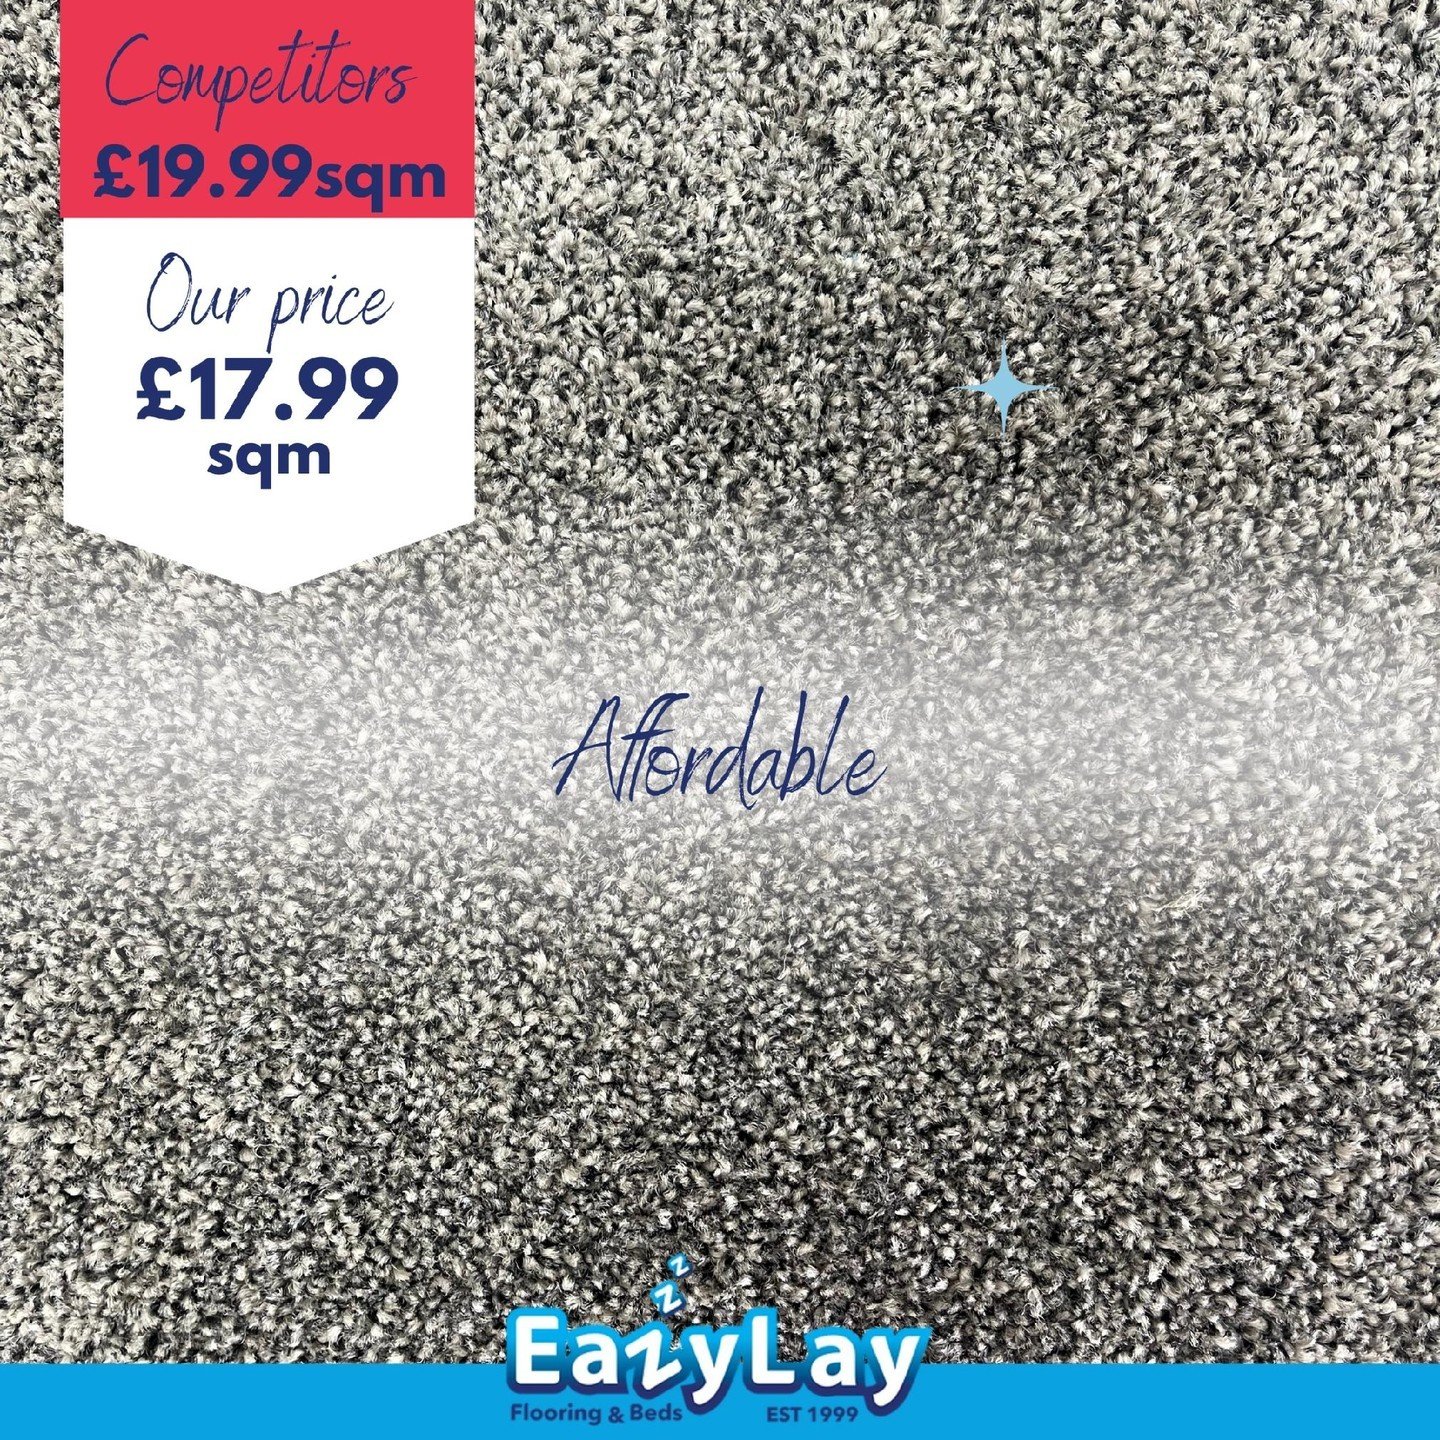 Step onto savings with Eazylay carpets&mdash;no markups, just honest, unbeatable prices every day.

We won't be beaten by any high street retailer - Their sale prices are our everyday prices!

Find your perfect floor at a cost you'll love! #Affordabl